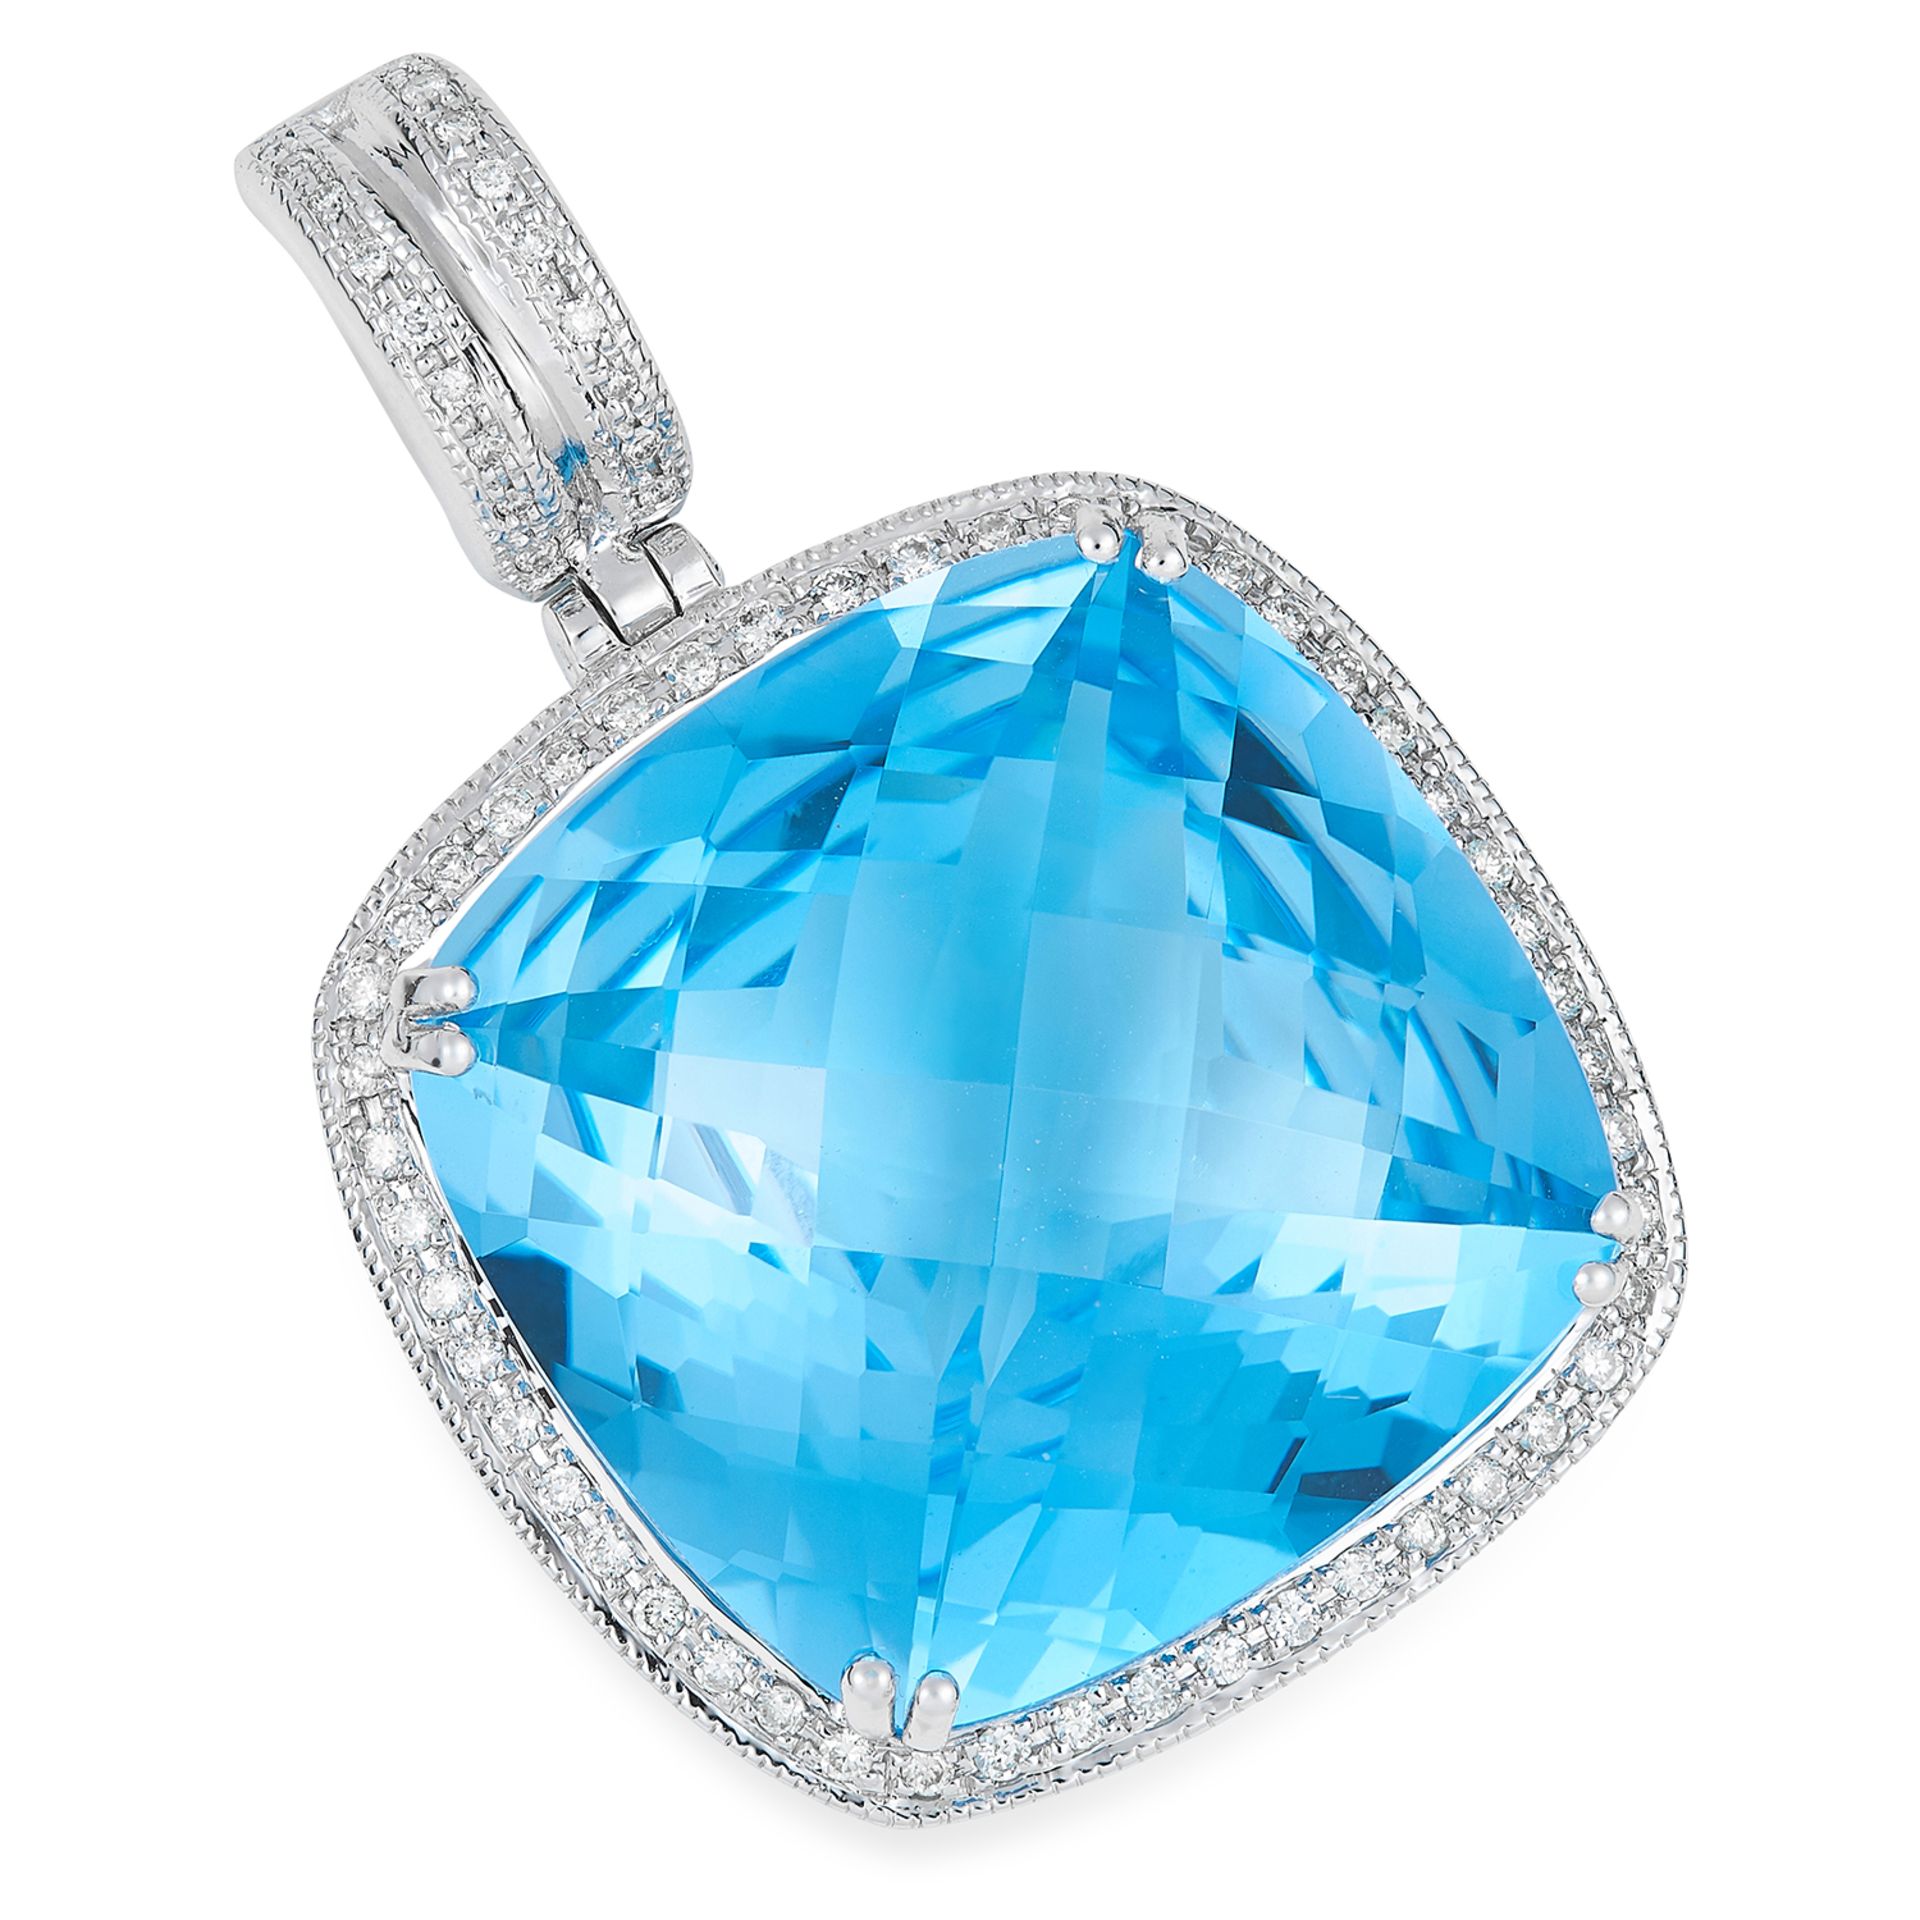 34.23 CARAT TOPAZ AND DIAMOND PENDANT in 18ct white gold, set with a faceted topaz of